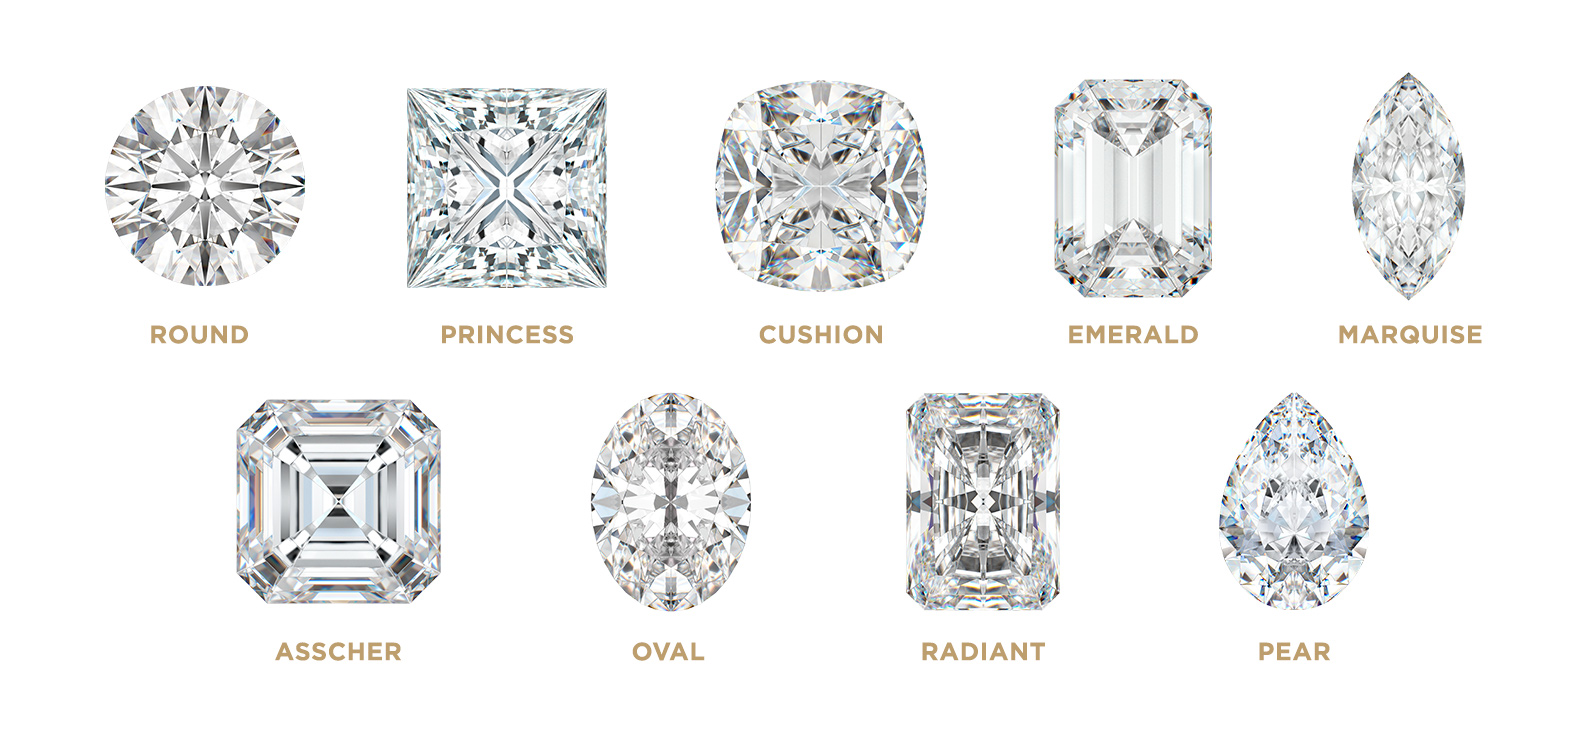 Image of the different diamond stone cuts